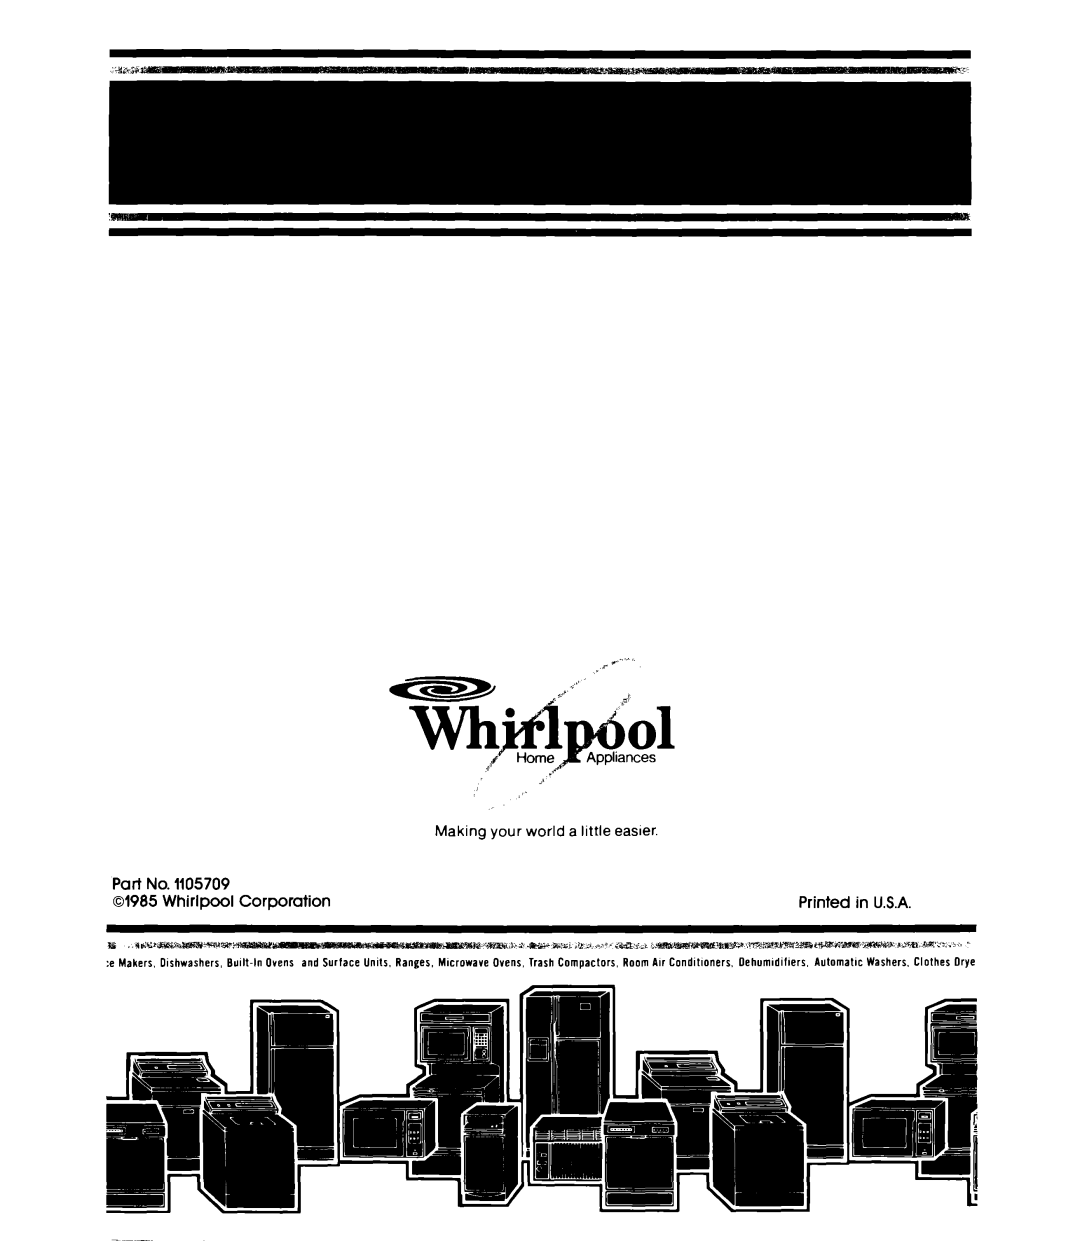 Whirlpool ET16EP manual Whirlpool Corporation, Printed, in U.S.A, Making your world a little easer 